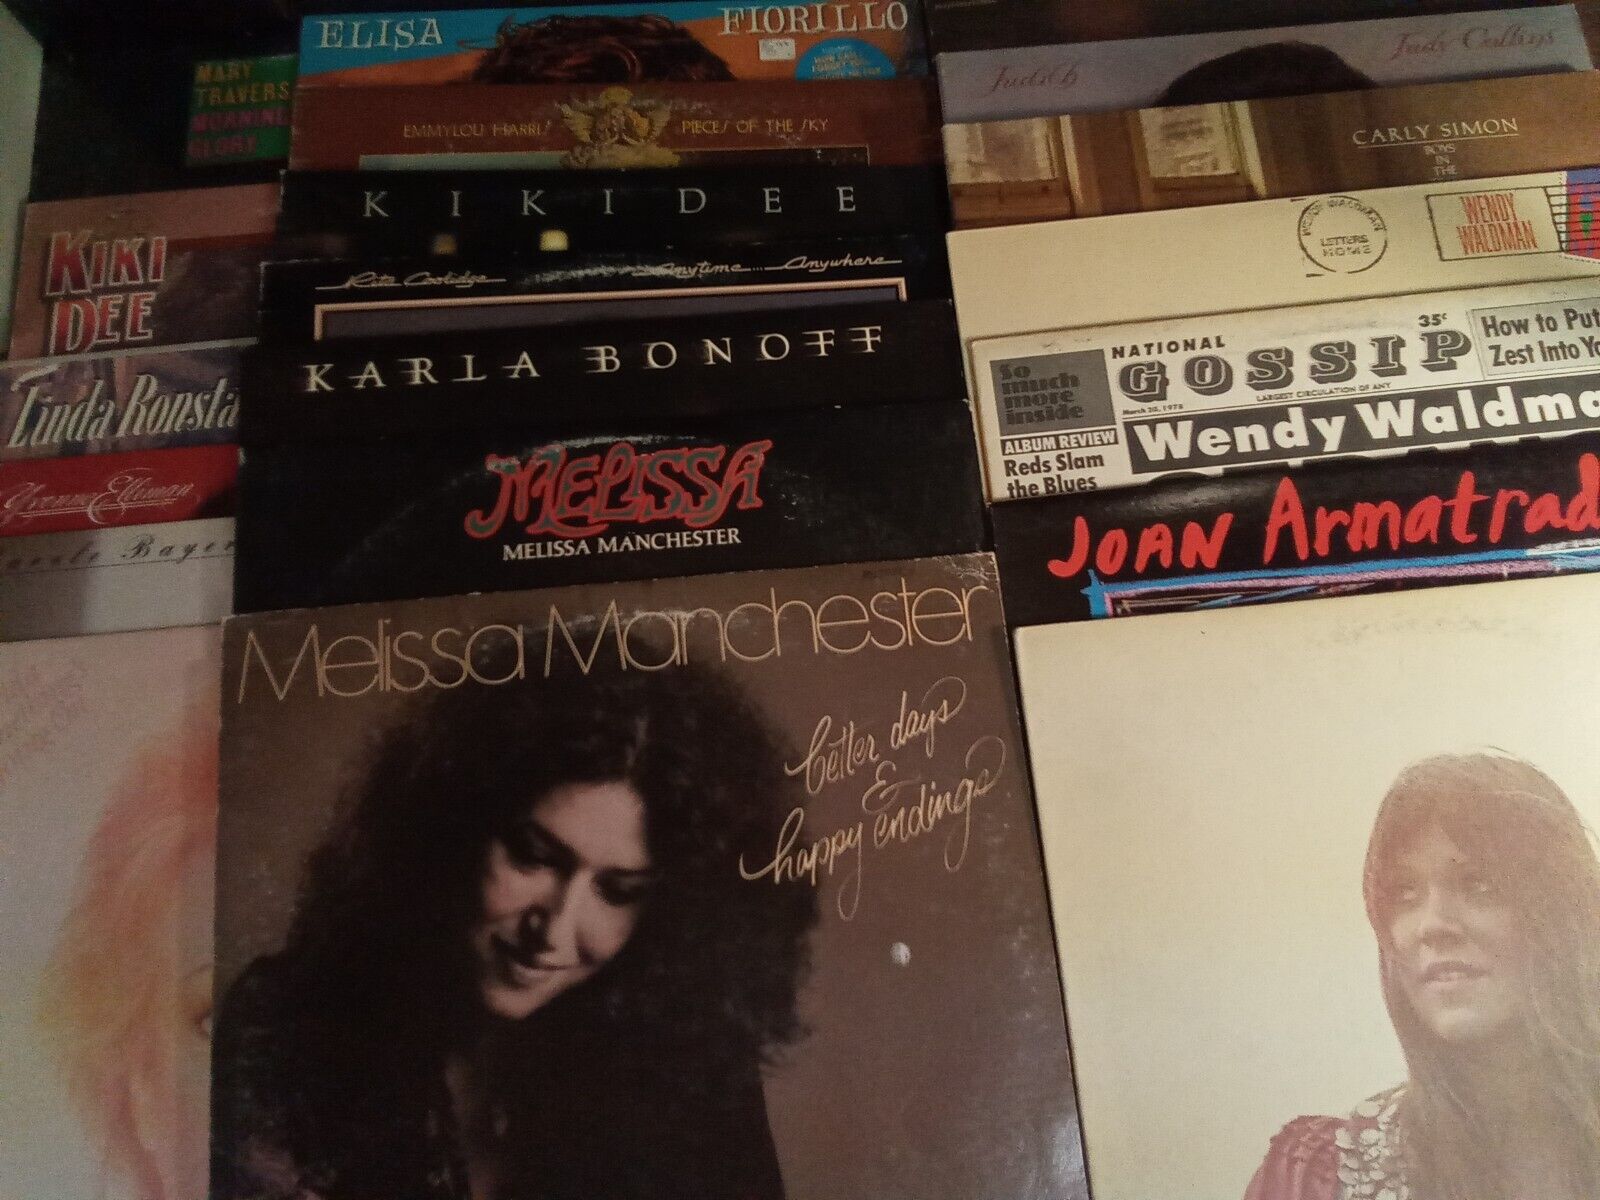 70s & 80s Female Vocalists/Singer-Songwriters Vinyl LPs You Pick 2 For $10